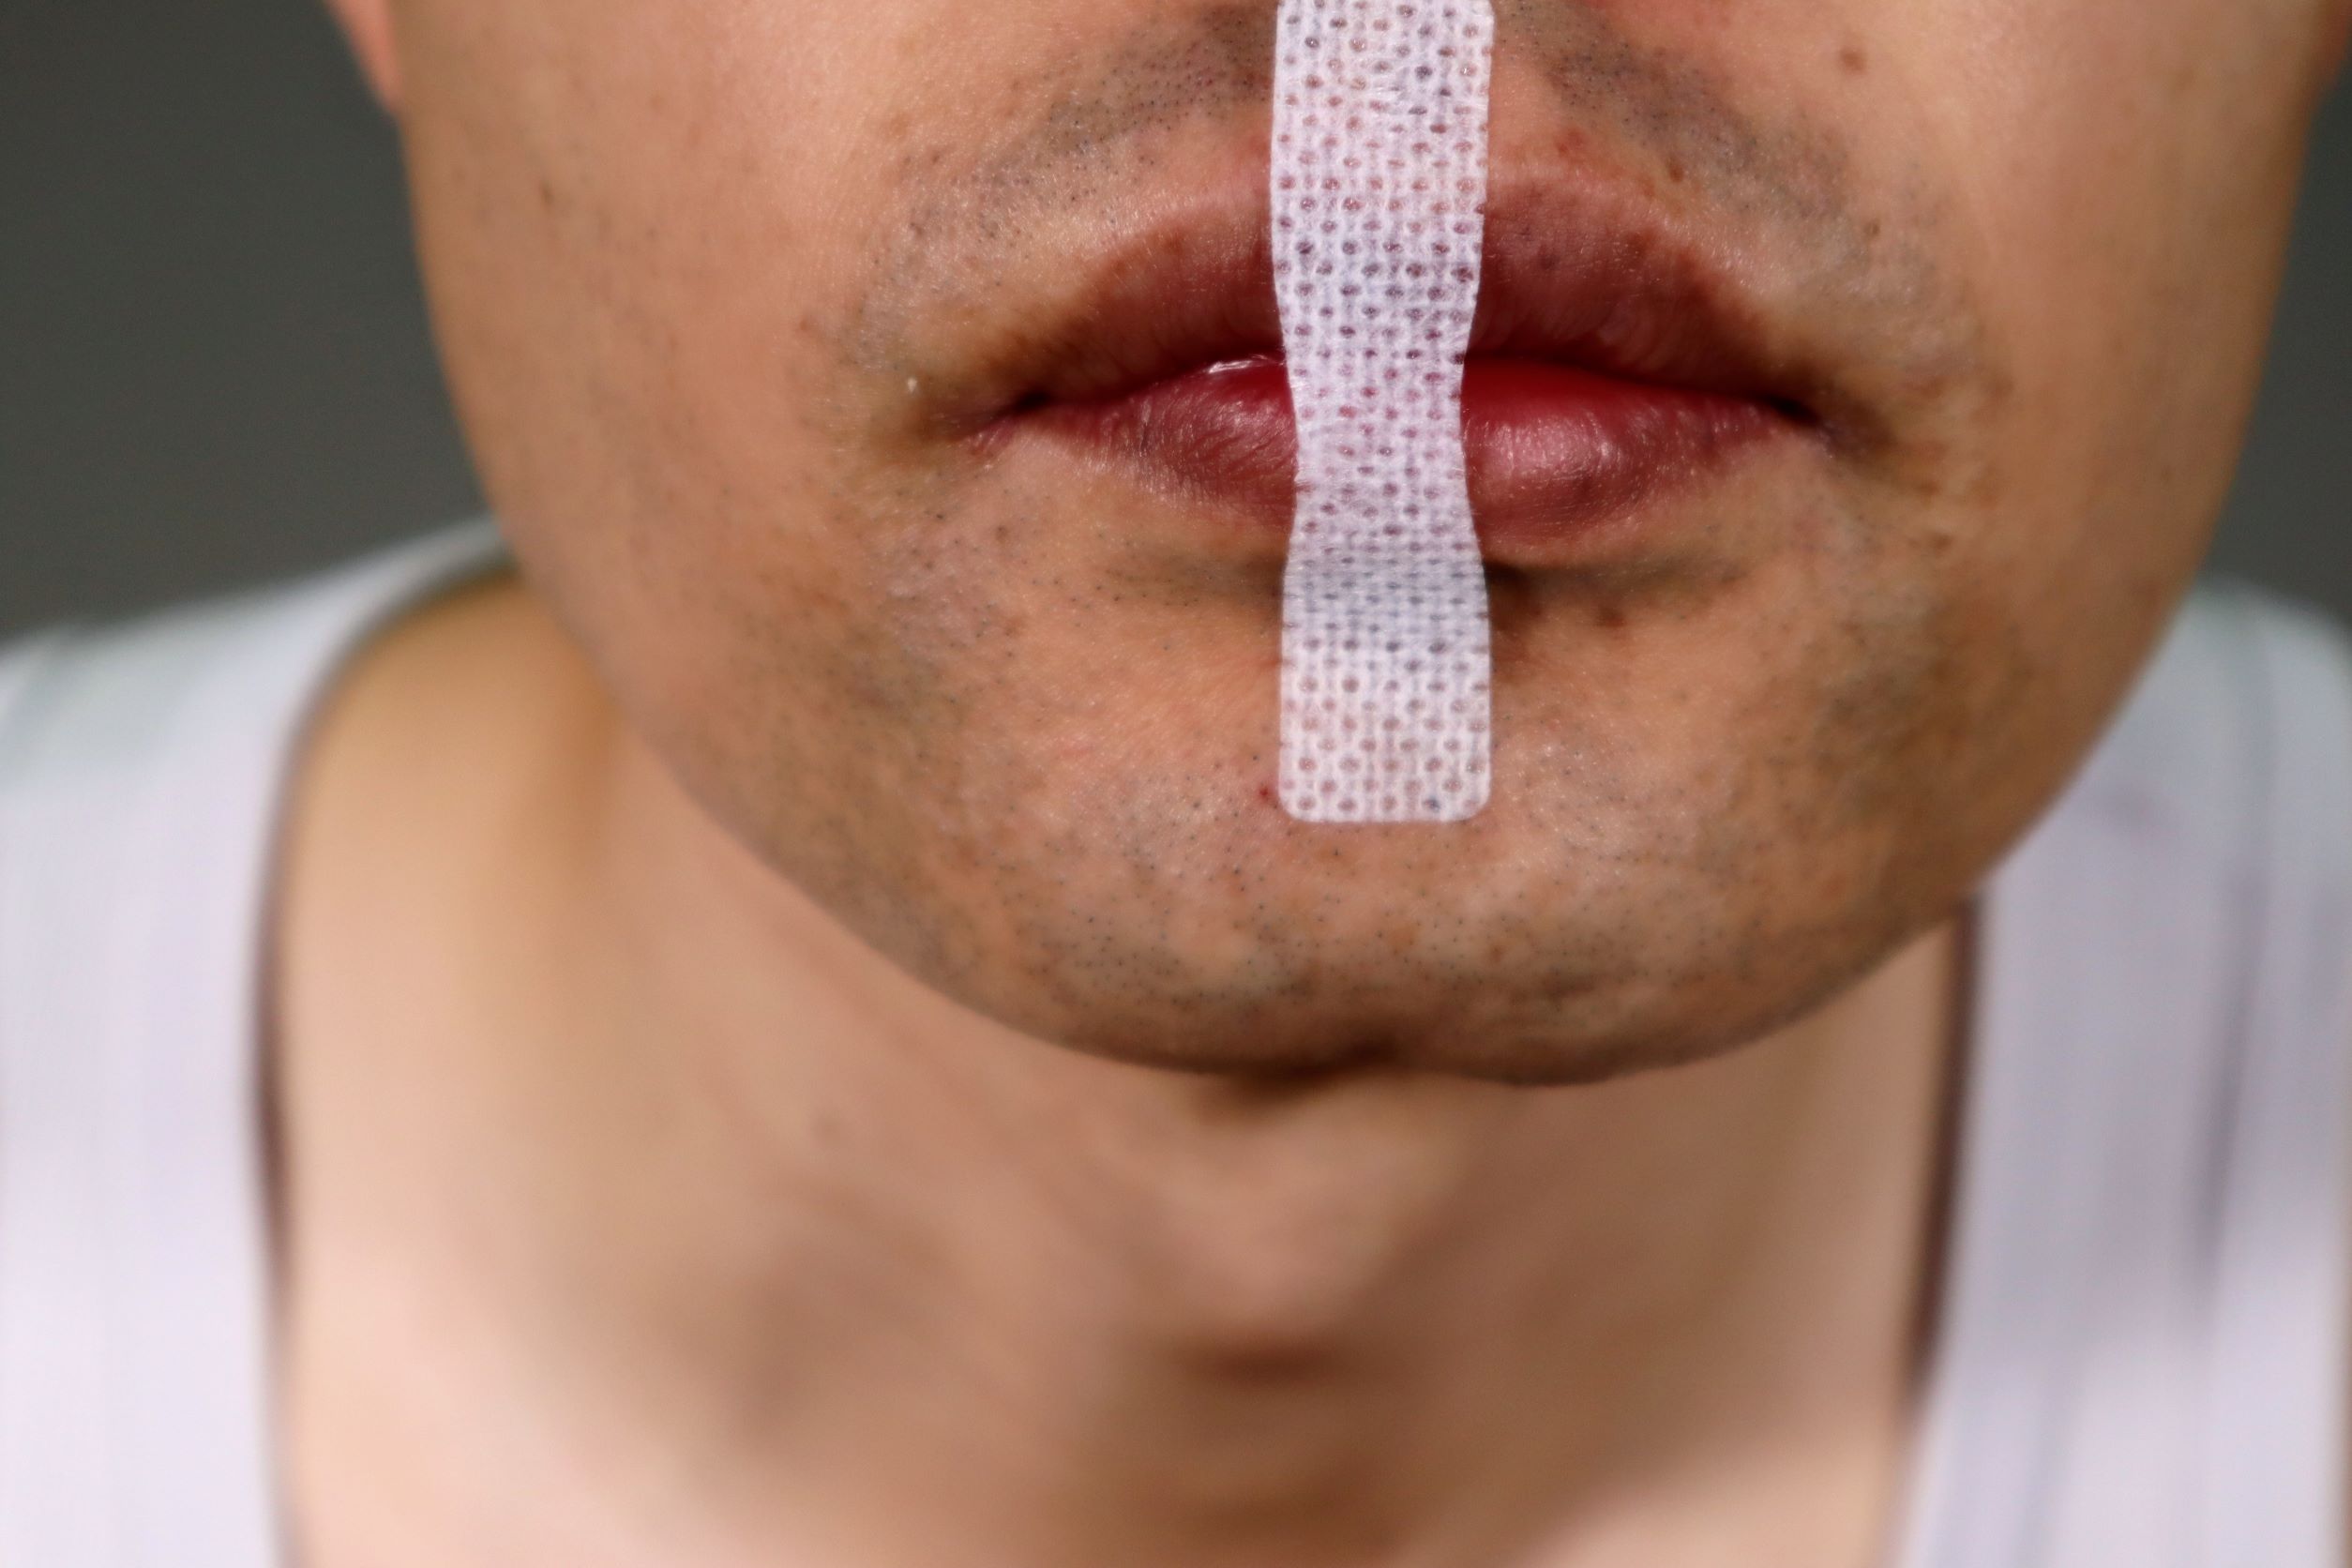 Mouth Taping for Sleep, Oral Health: Doctors Warn of Risks